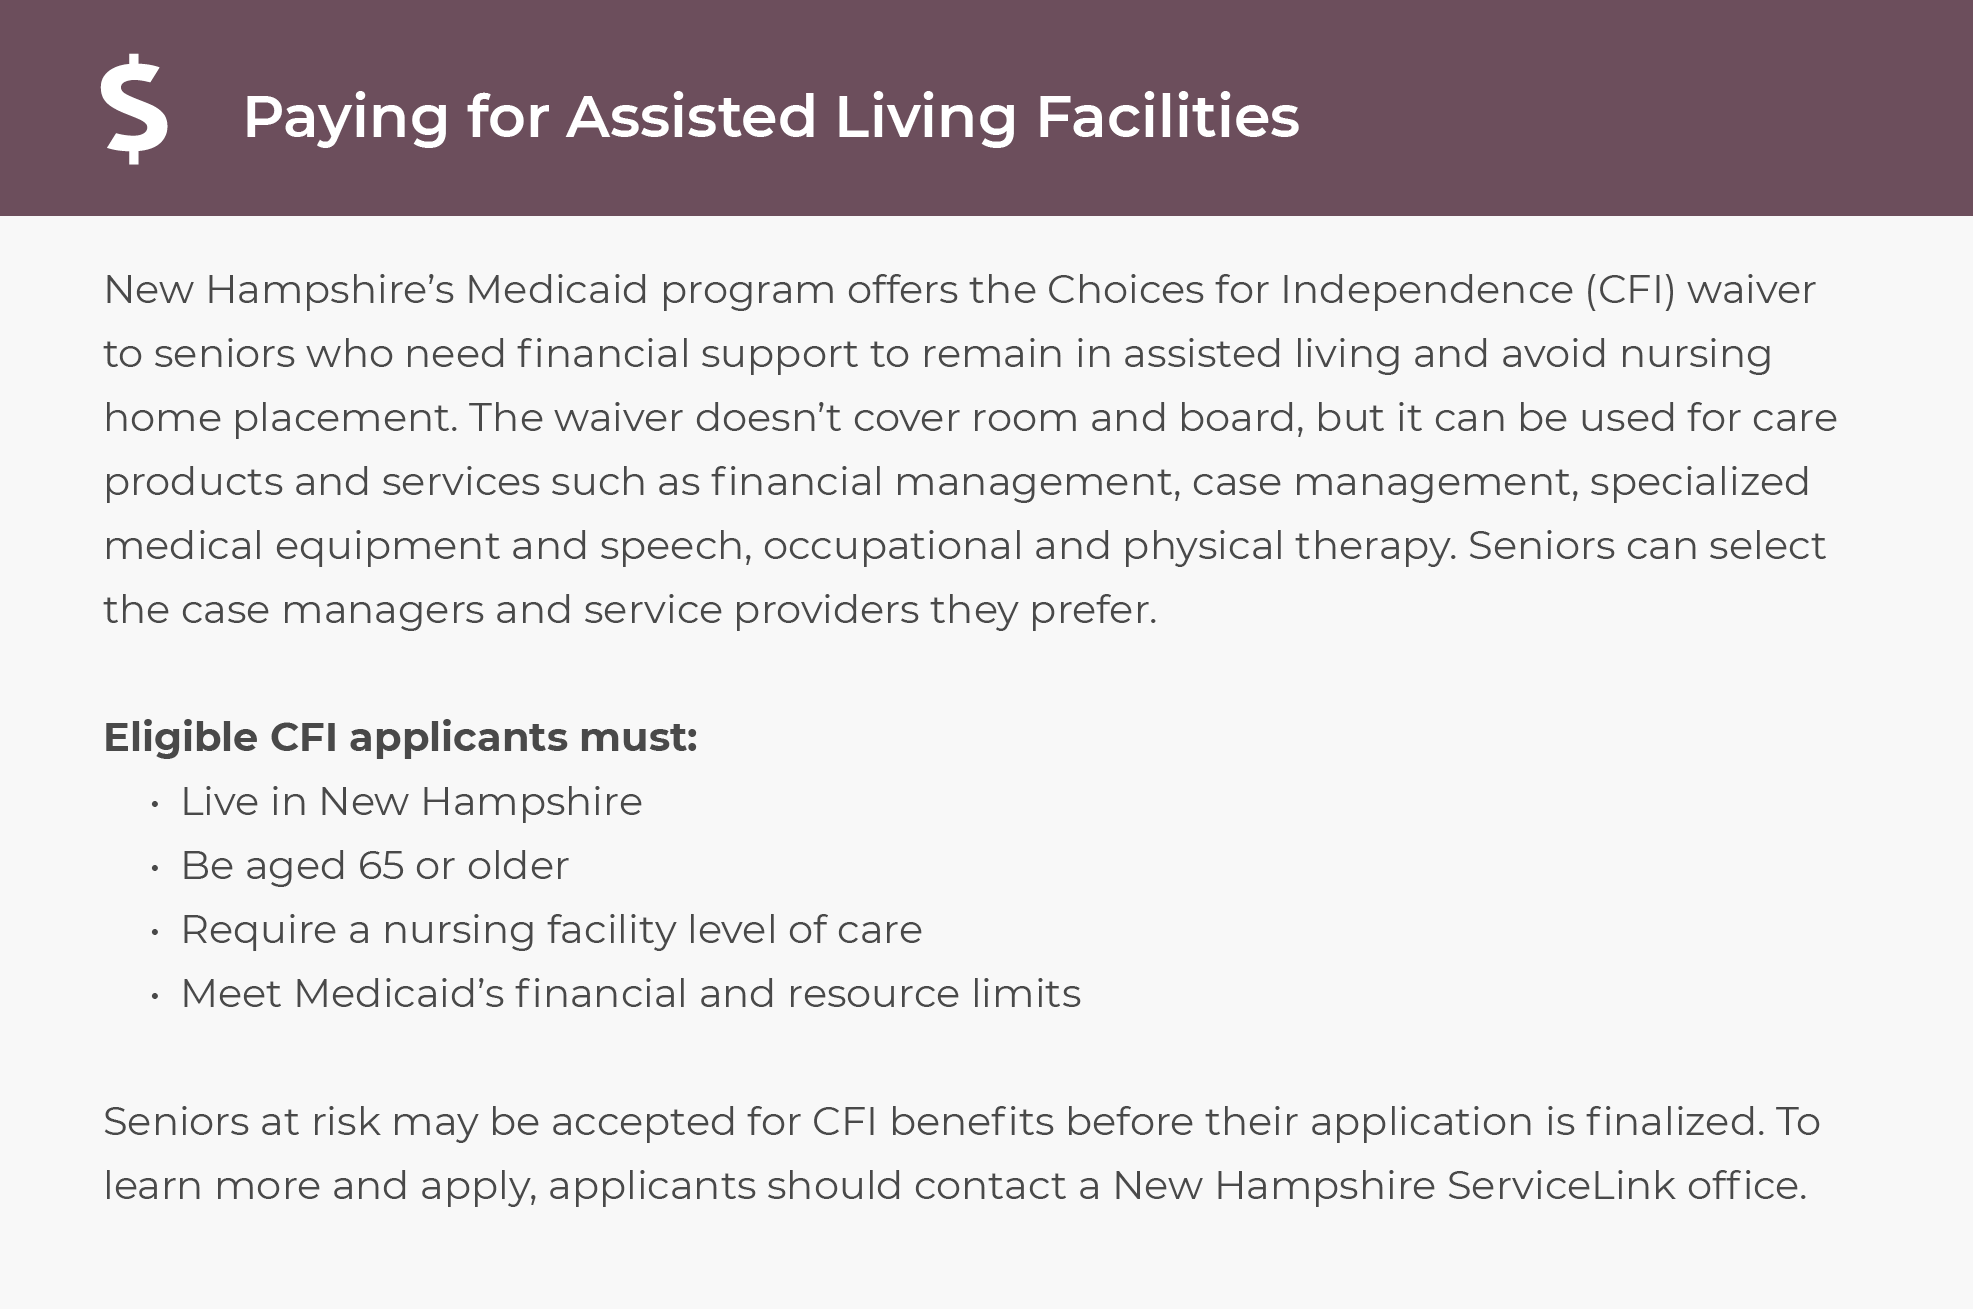 Paying for Assisted Living Facilities in New Hampshire